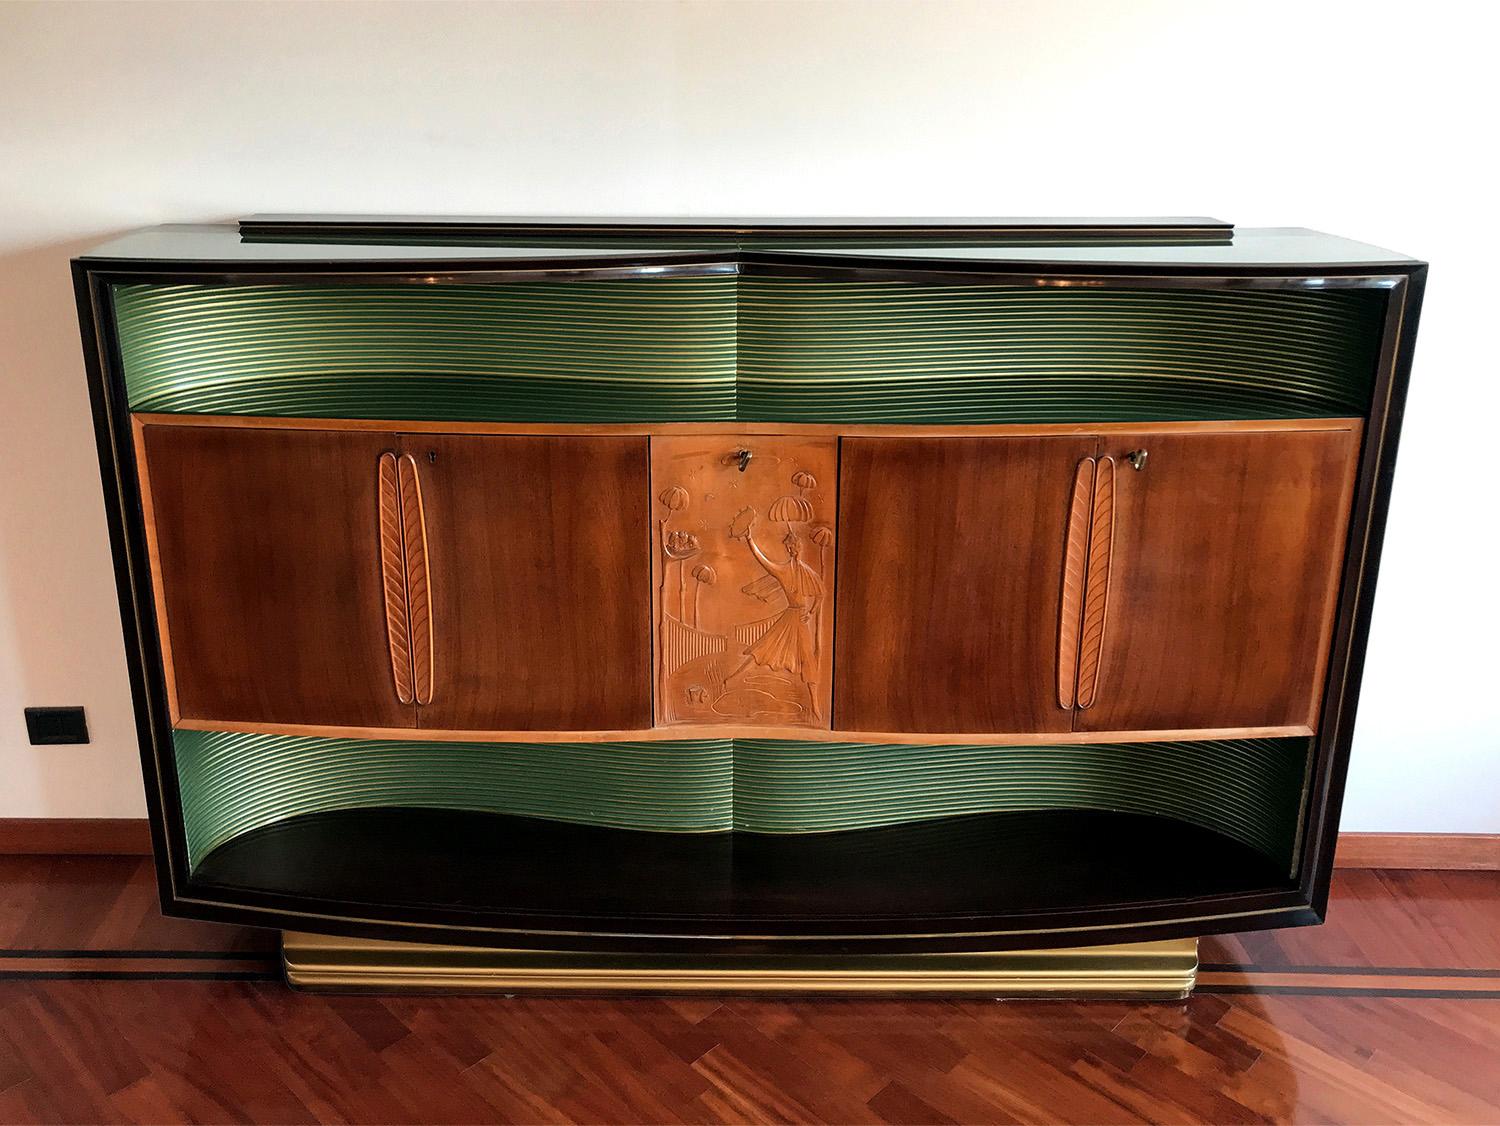 Stunning walnut Sideboard designed by Vittorio Dassi in the 1950s.

It’s finished with two long shaped colored green glass that give it a particularly brightness, one placed on the top plane and the other one inside the hollow, internally crafted of